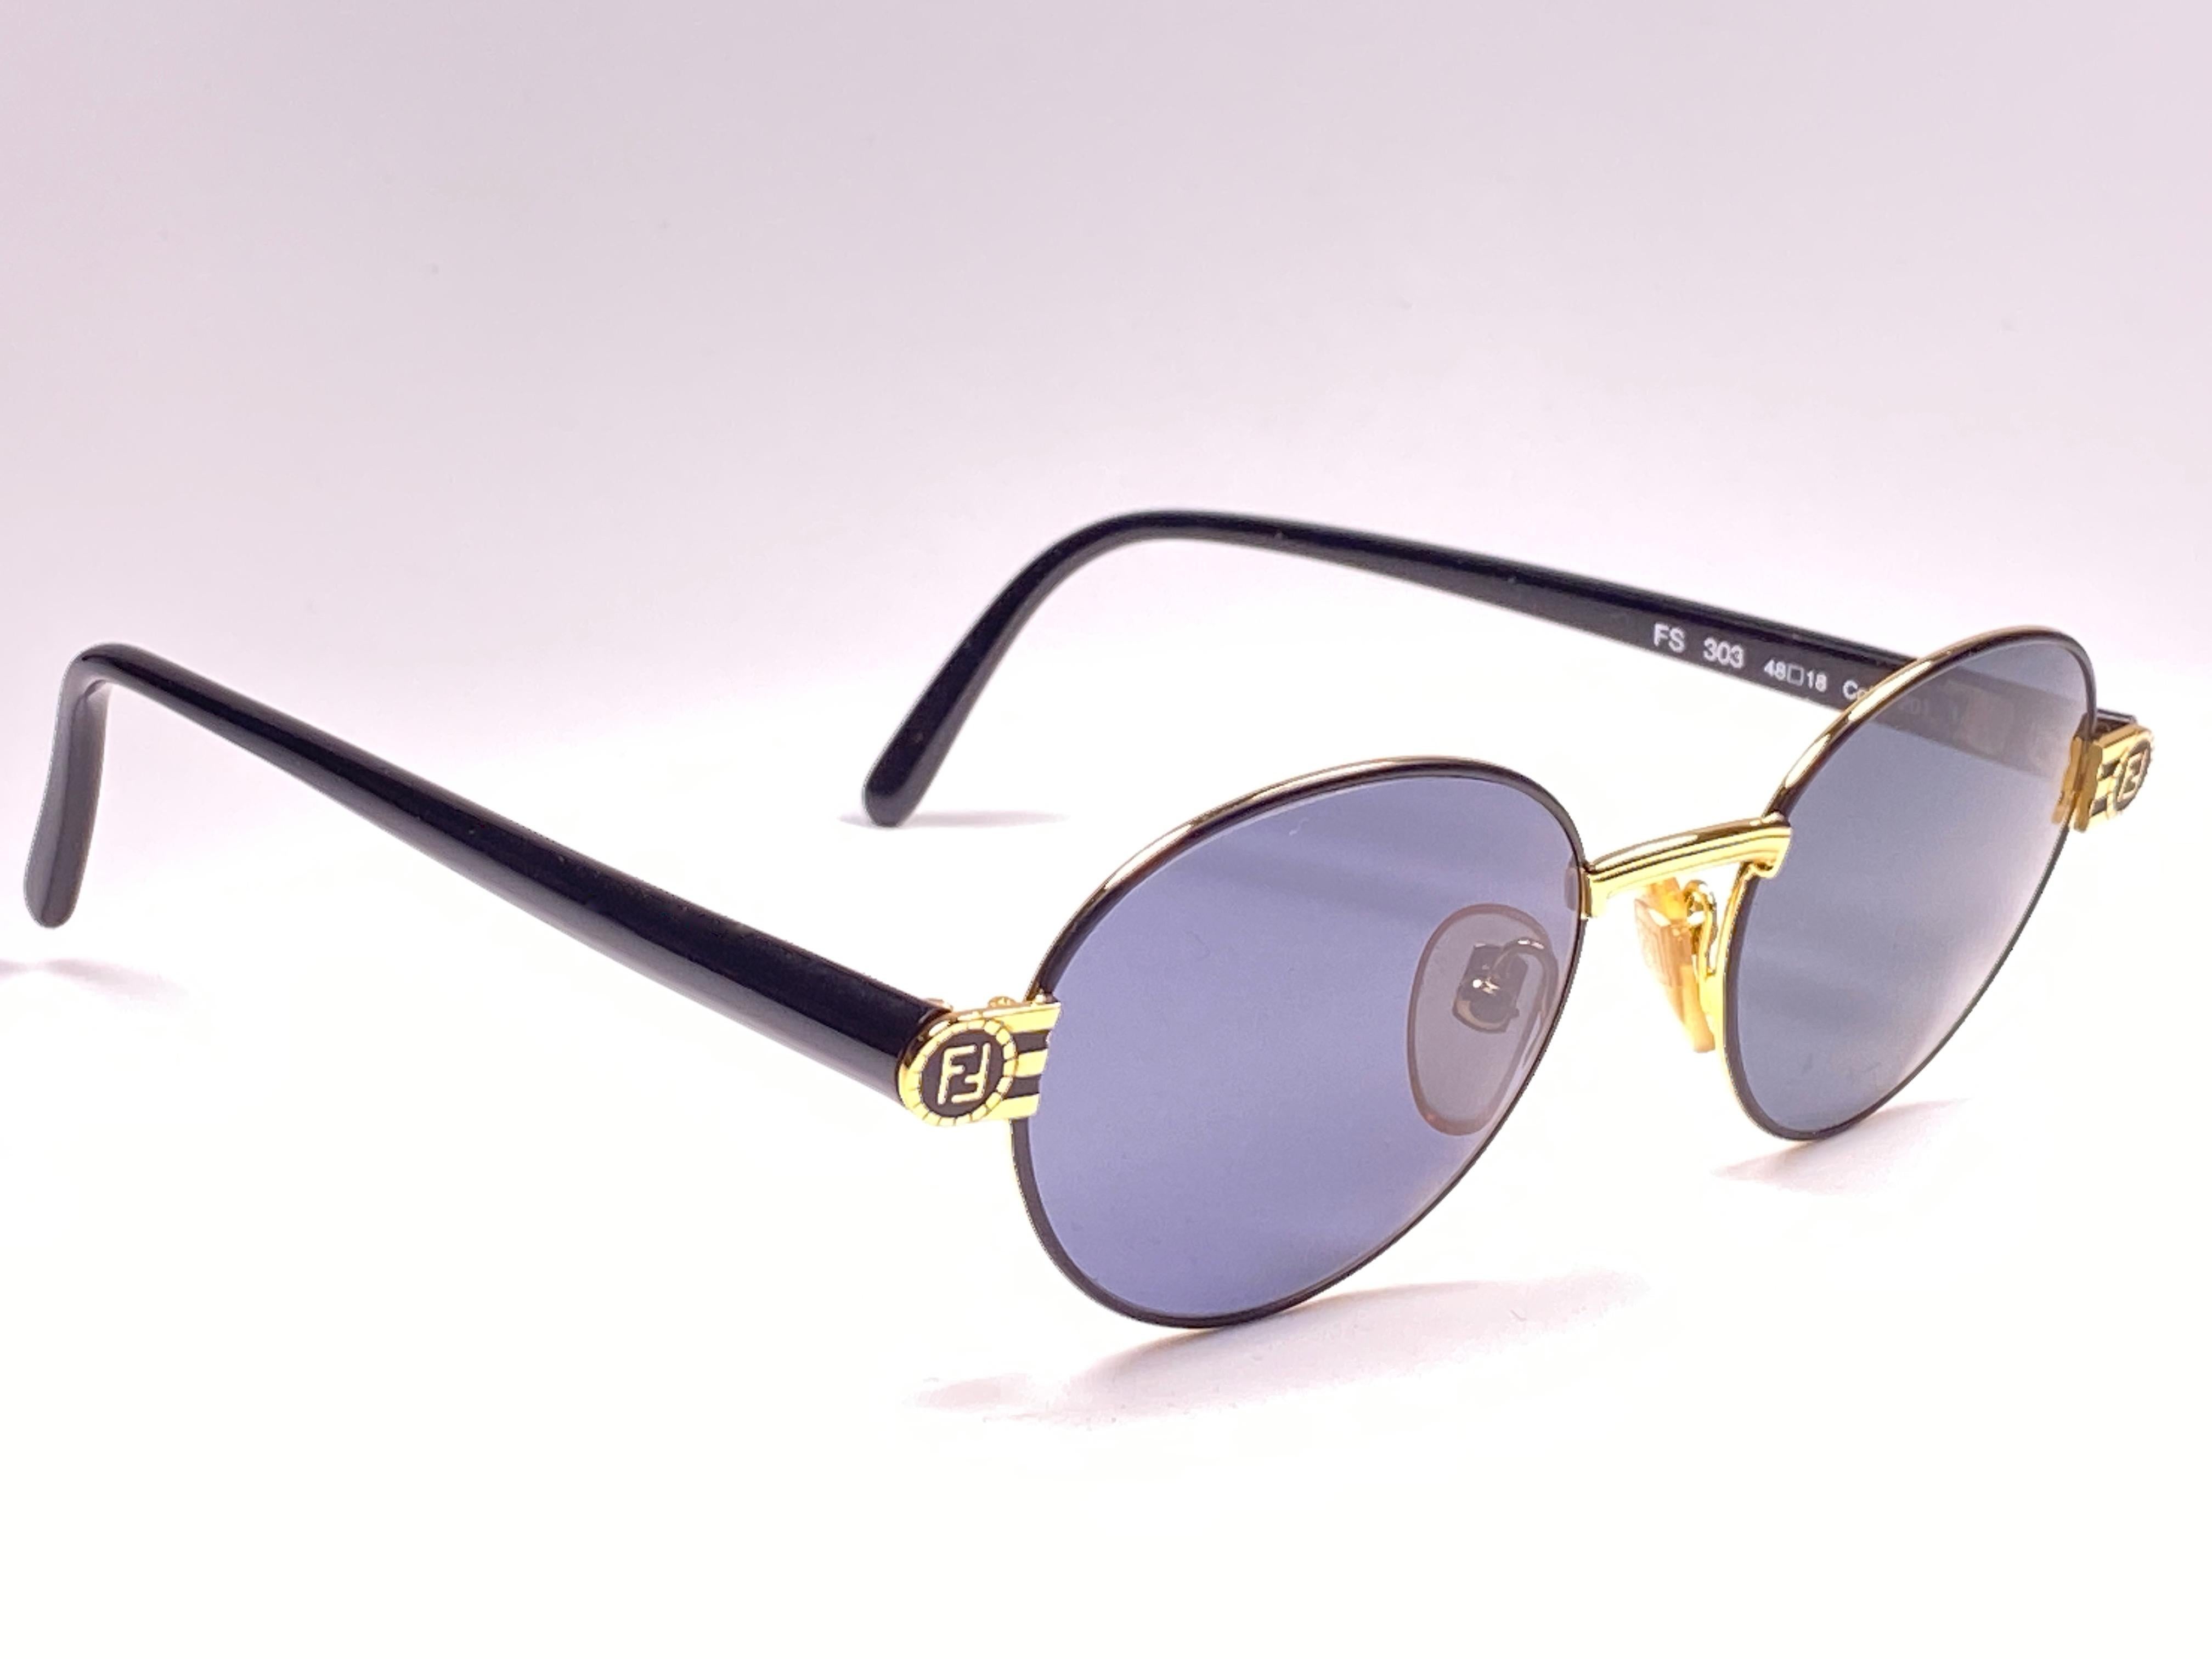 New Fendi gold oval frame with solid grey ( UV protection ) lenses.

Made in Italy.
 
Produced and design in 1990's.

New, never worn or displayed. this  item may show minor sign of wear due to storage.